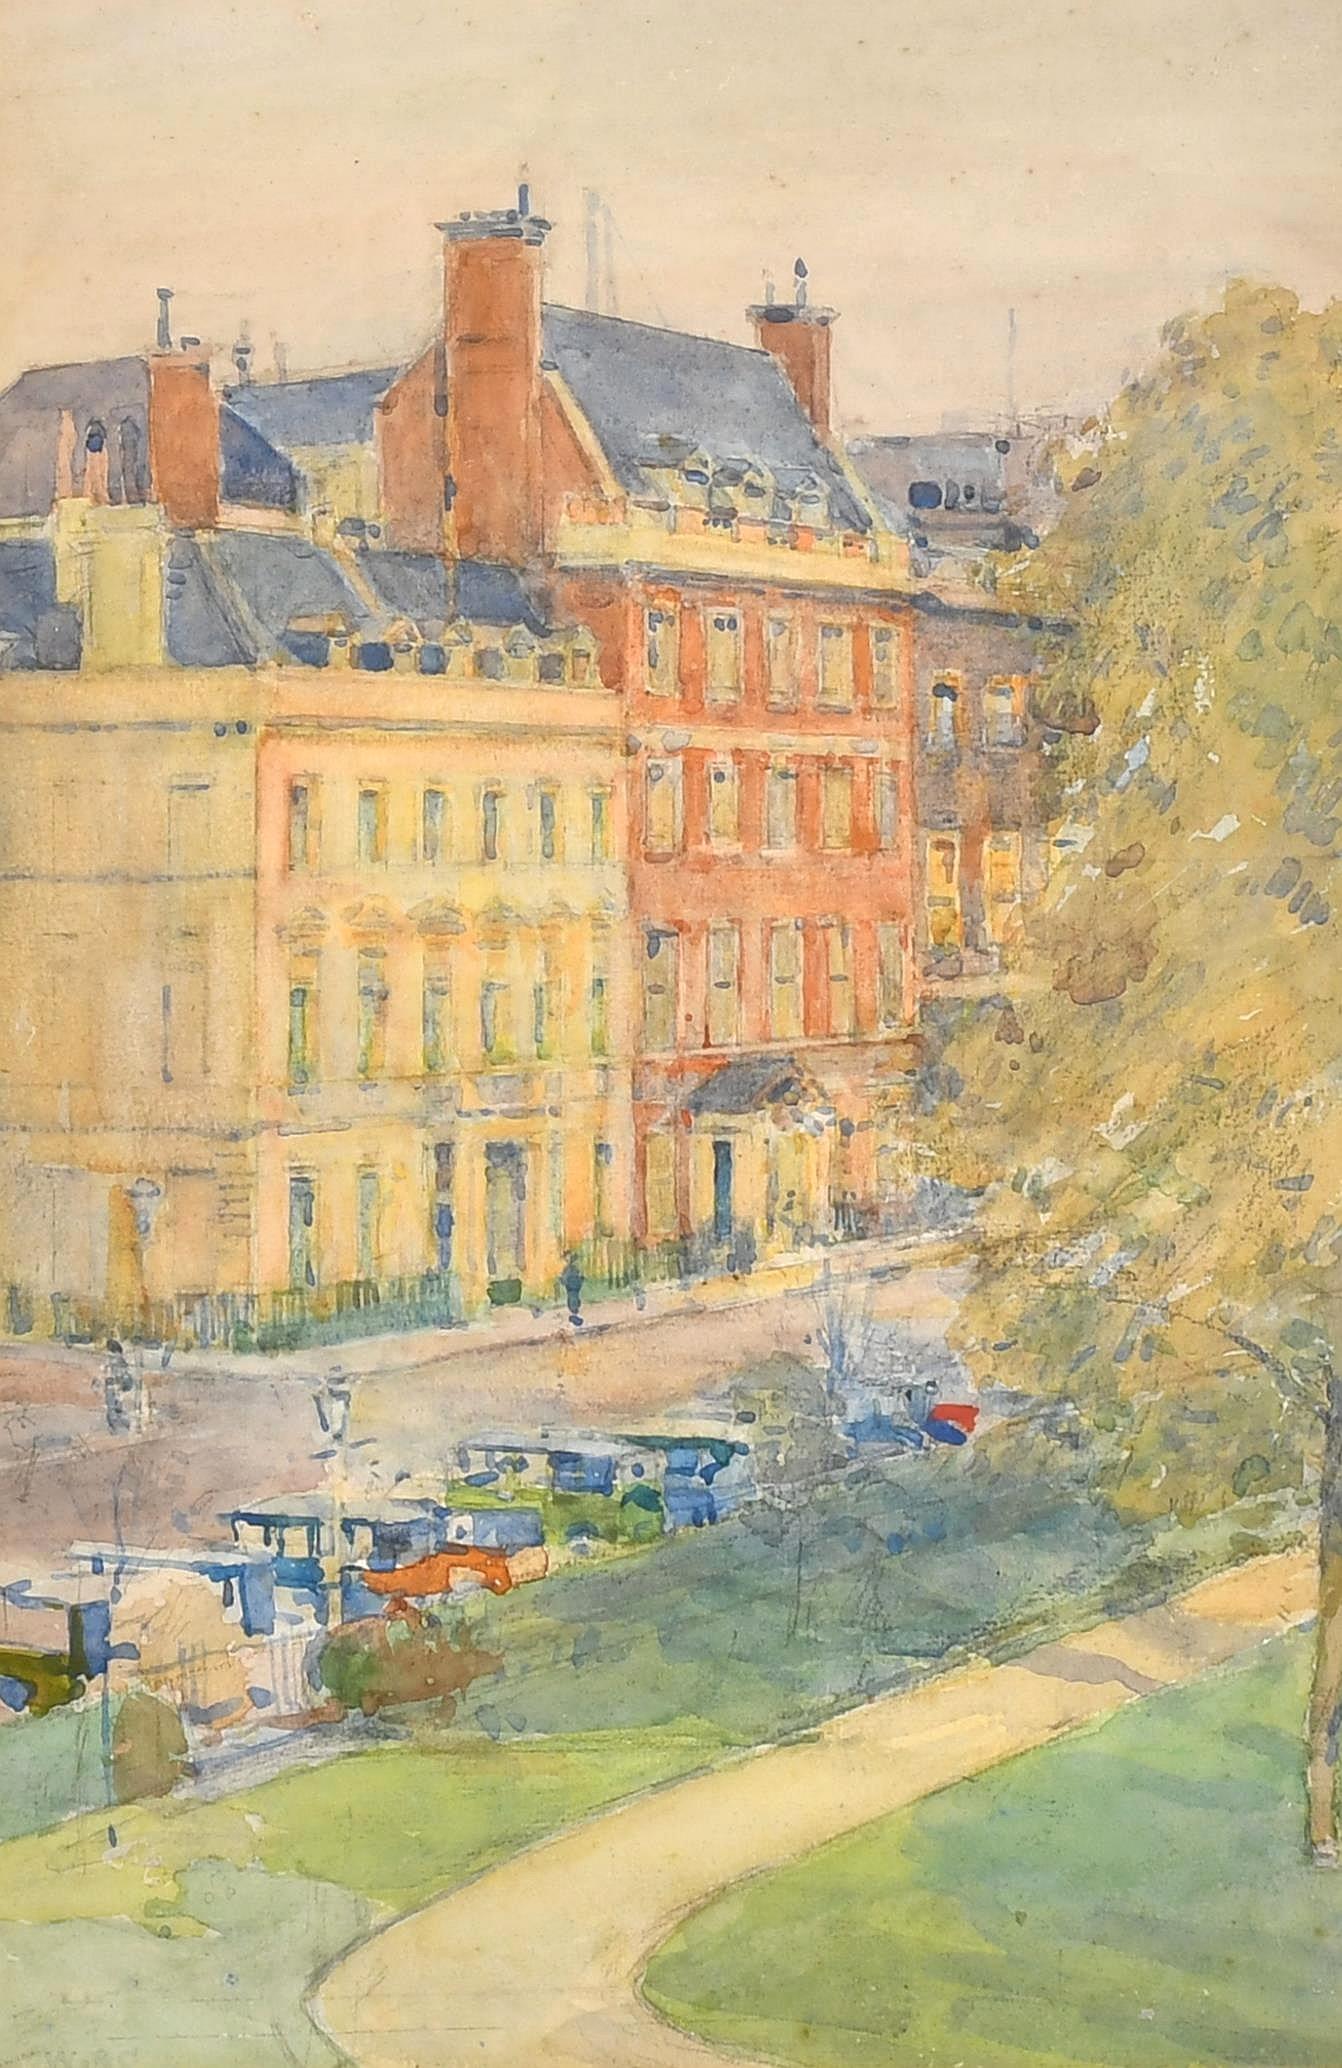 St James's Square, London - Street Buildings Architecture Watercolor Painting - Art by William Benjamin Chamberlin